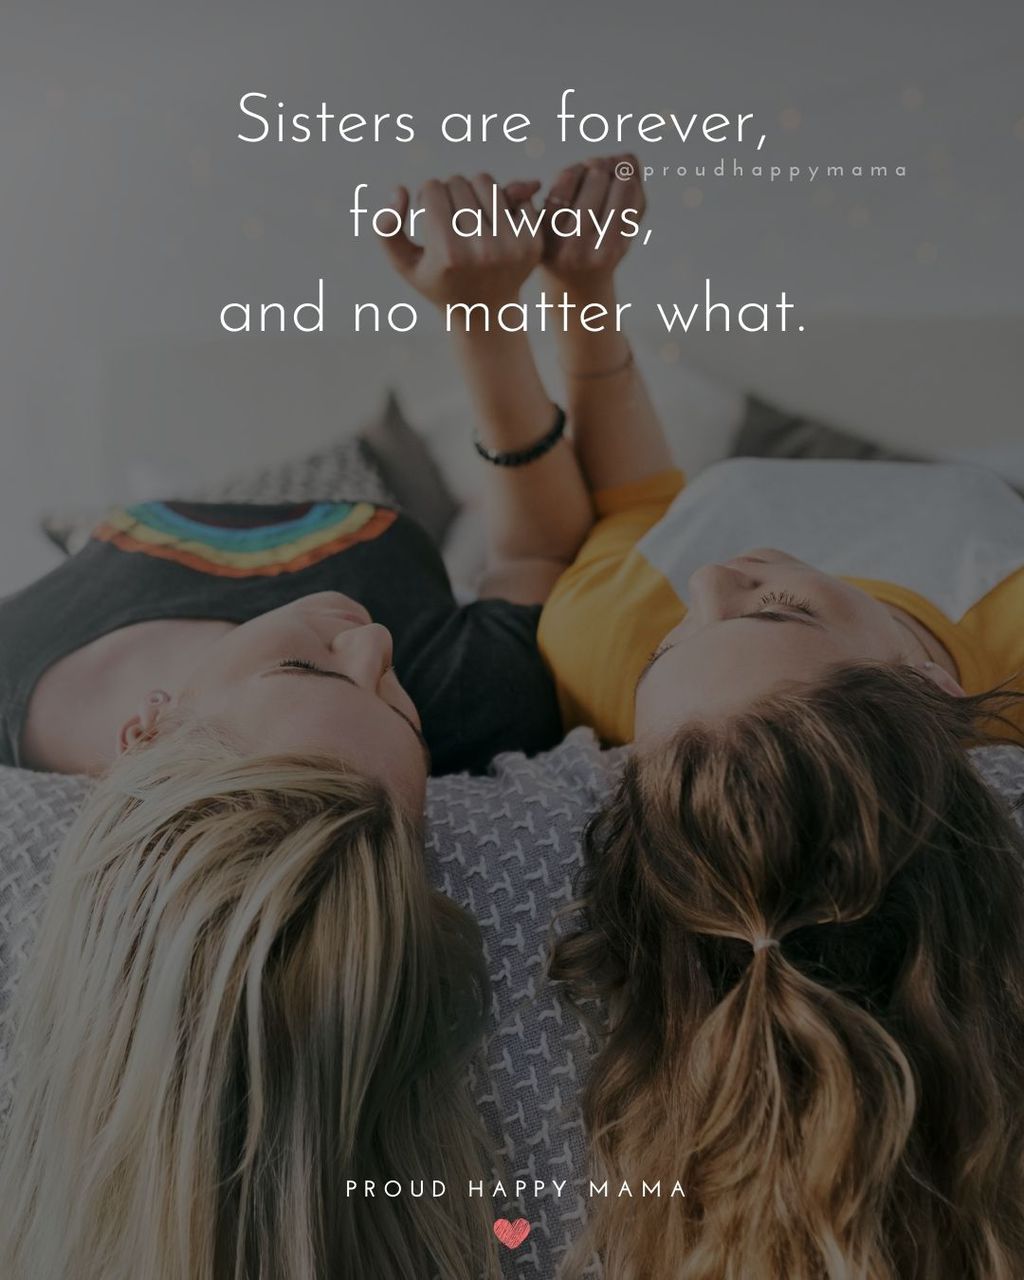 Sister Quotes - Sisters are forever, for always, and no matter what.